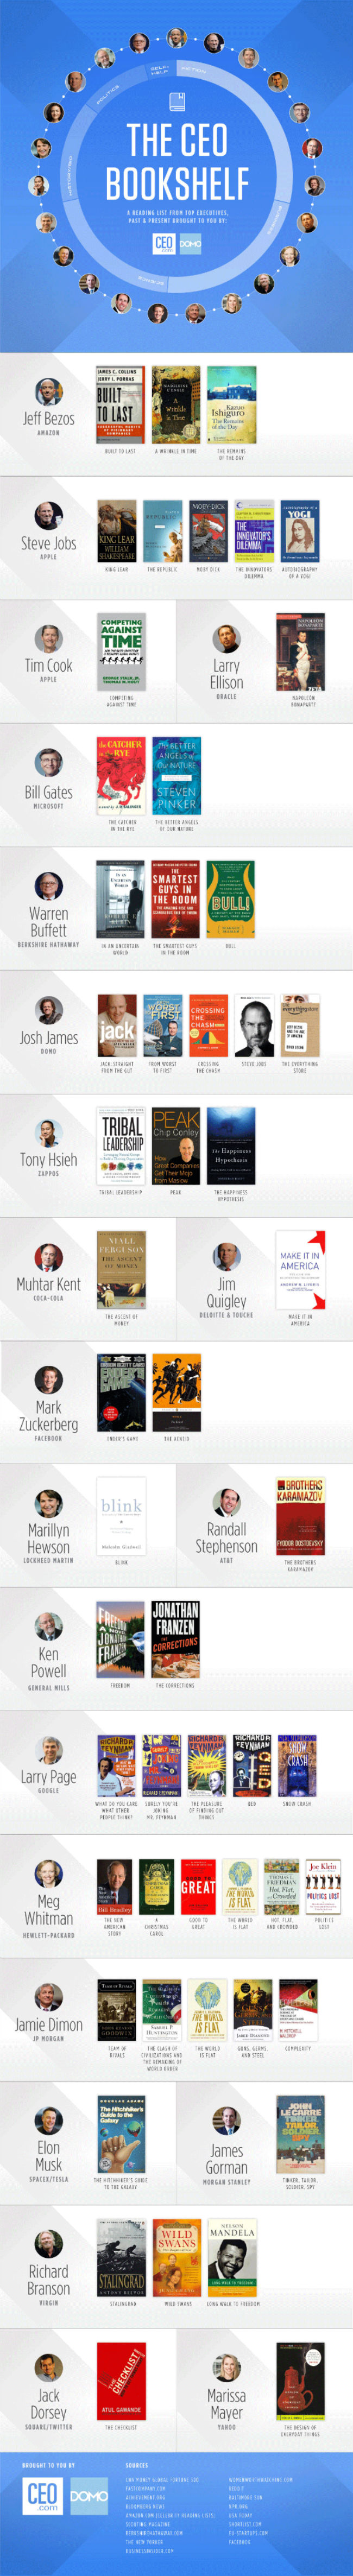 The CEO Bookself - What do CEOs read?